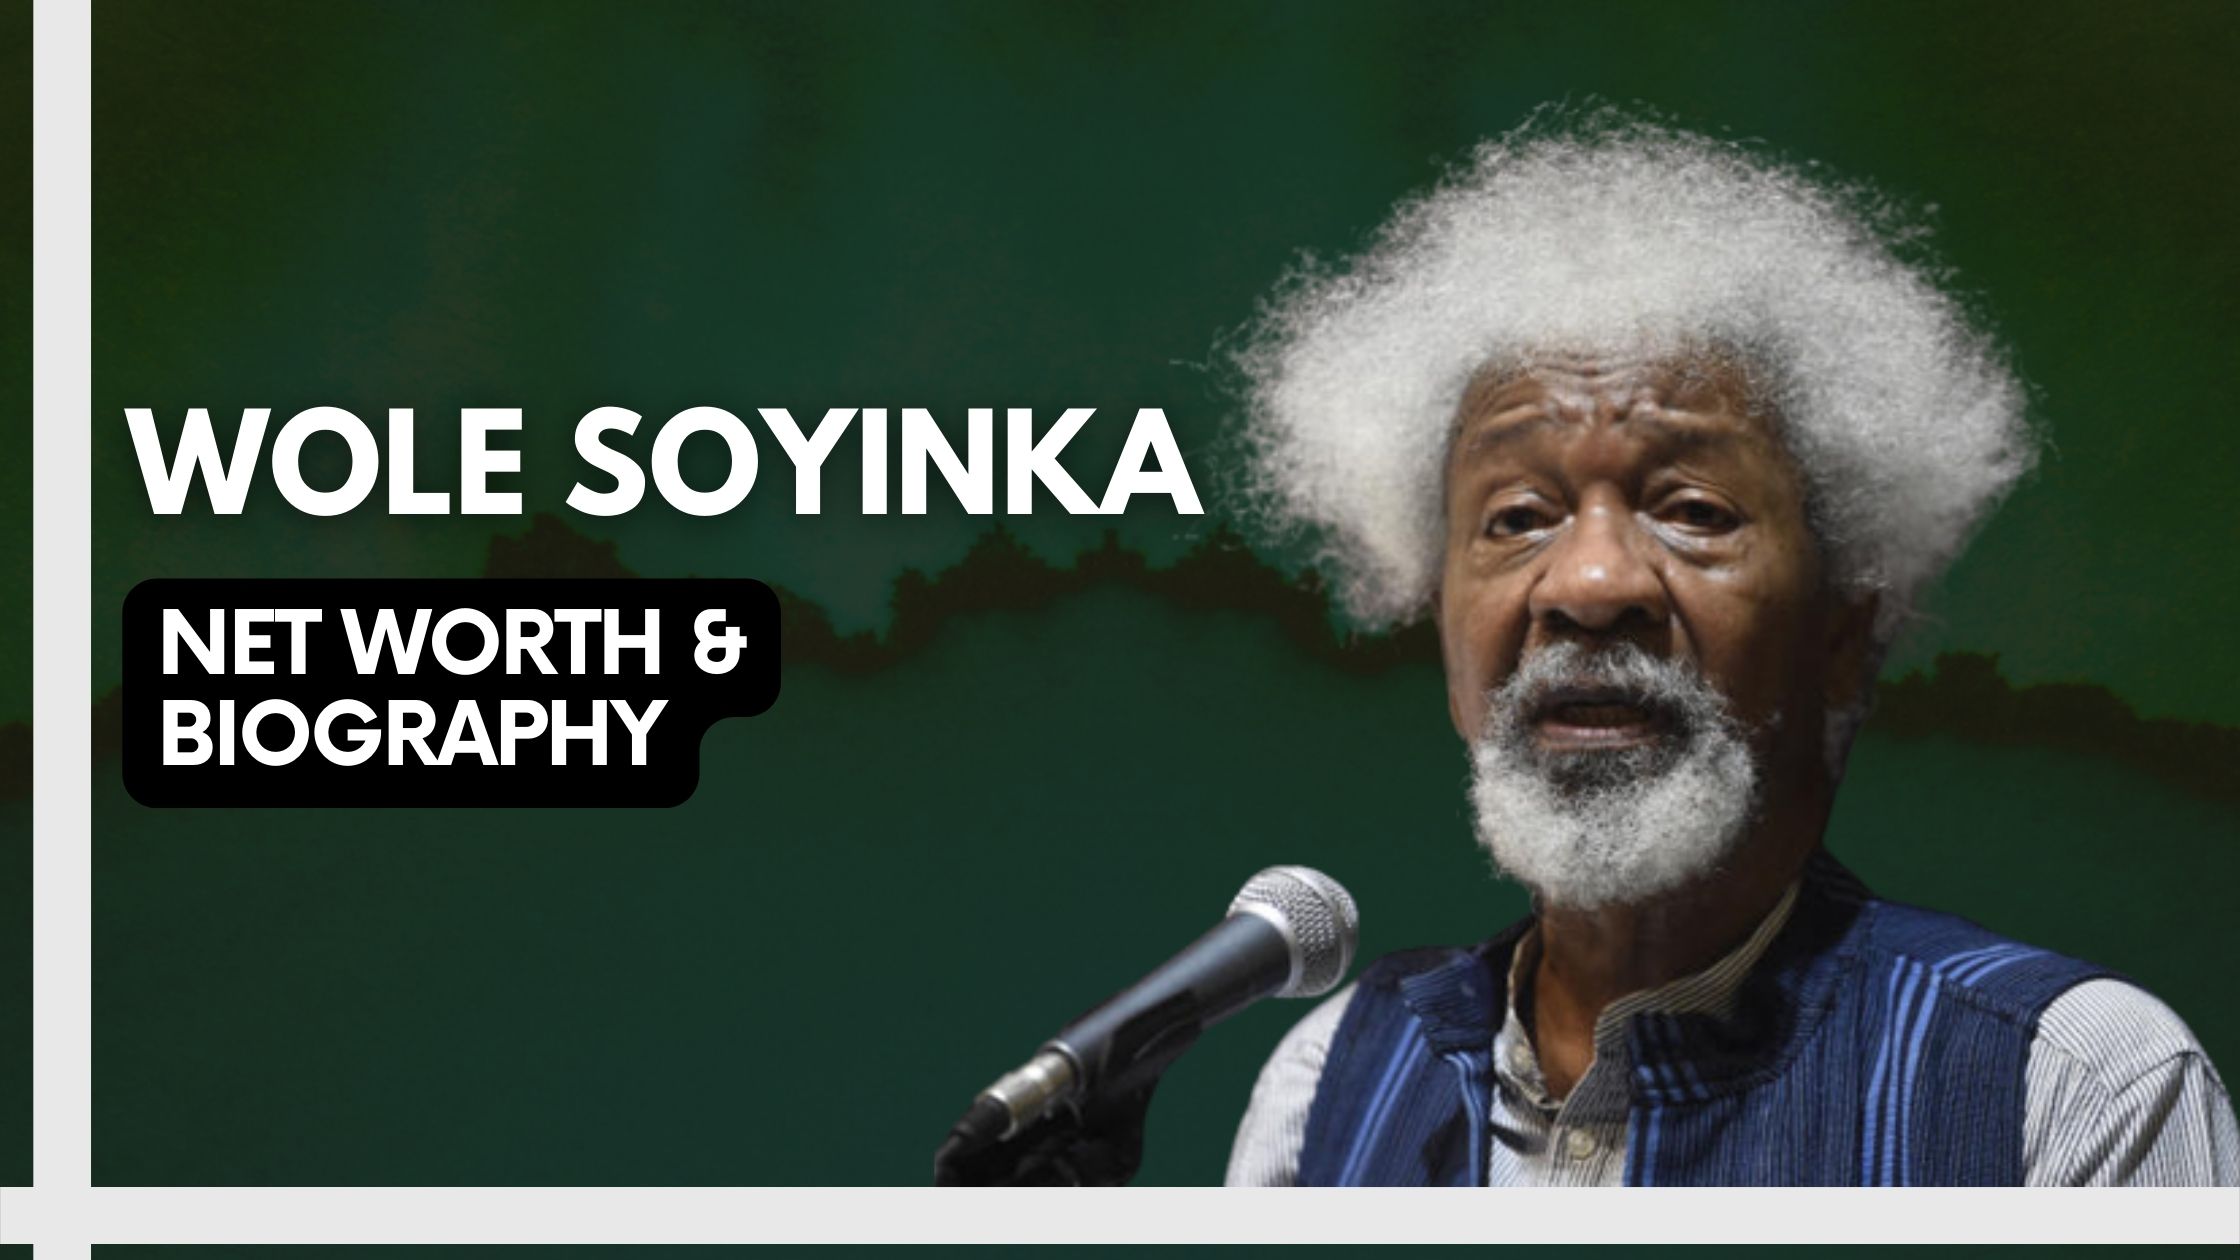 What Is Wole Soyinka's Net Worth